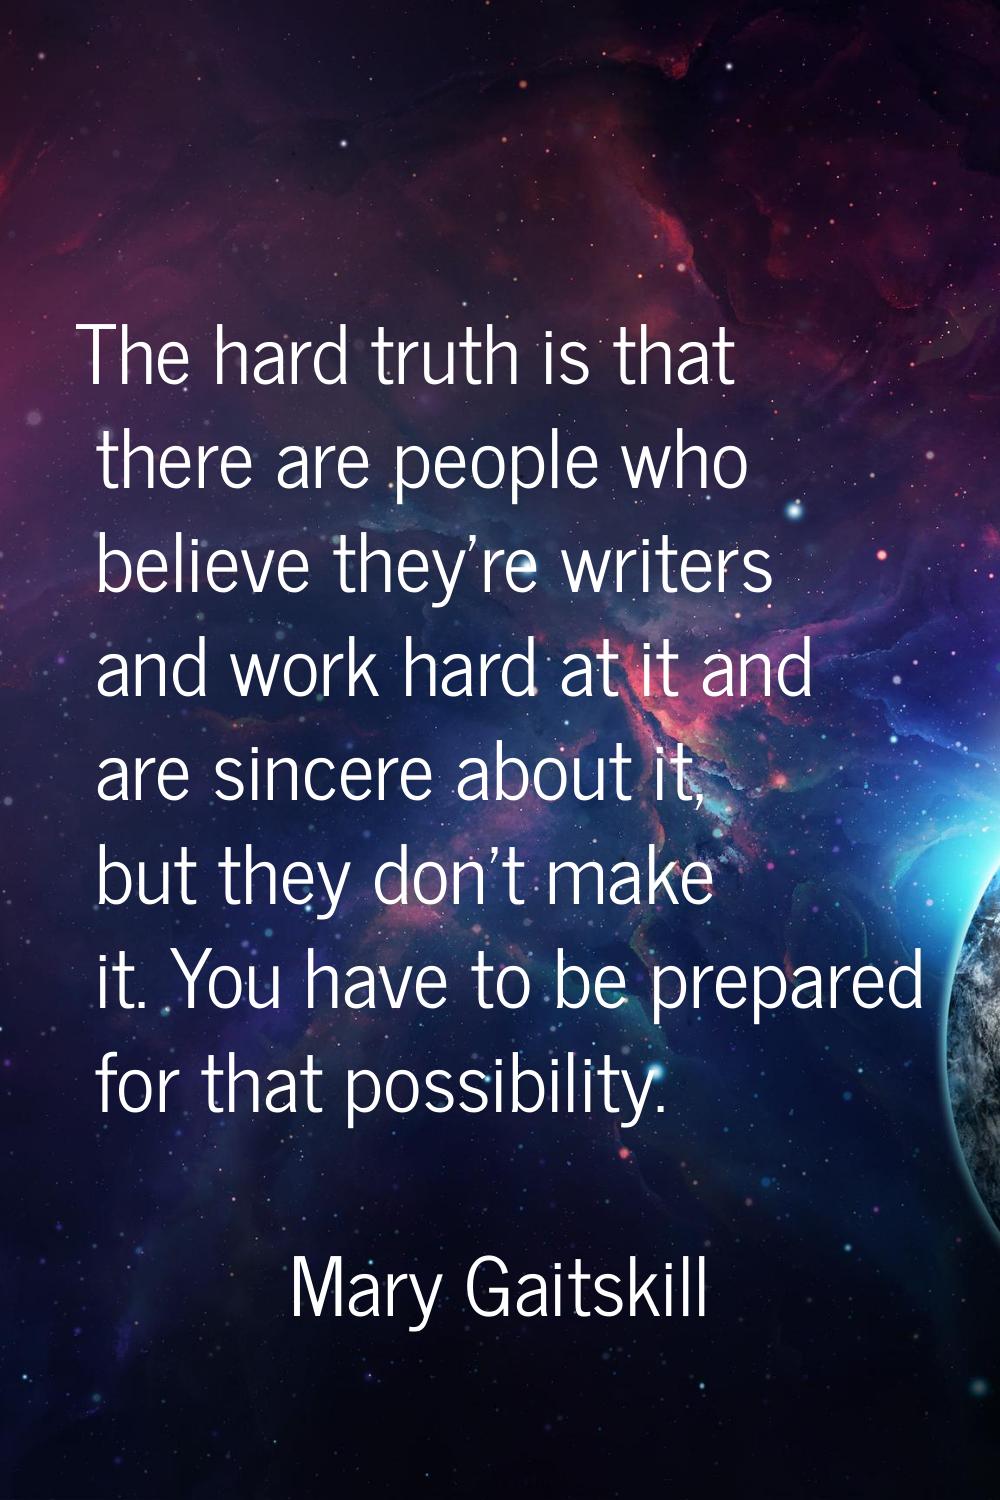 The hard truth is that there are people who believe they're writers and work hard at it and are sin